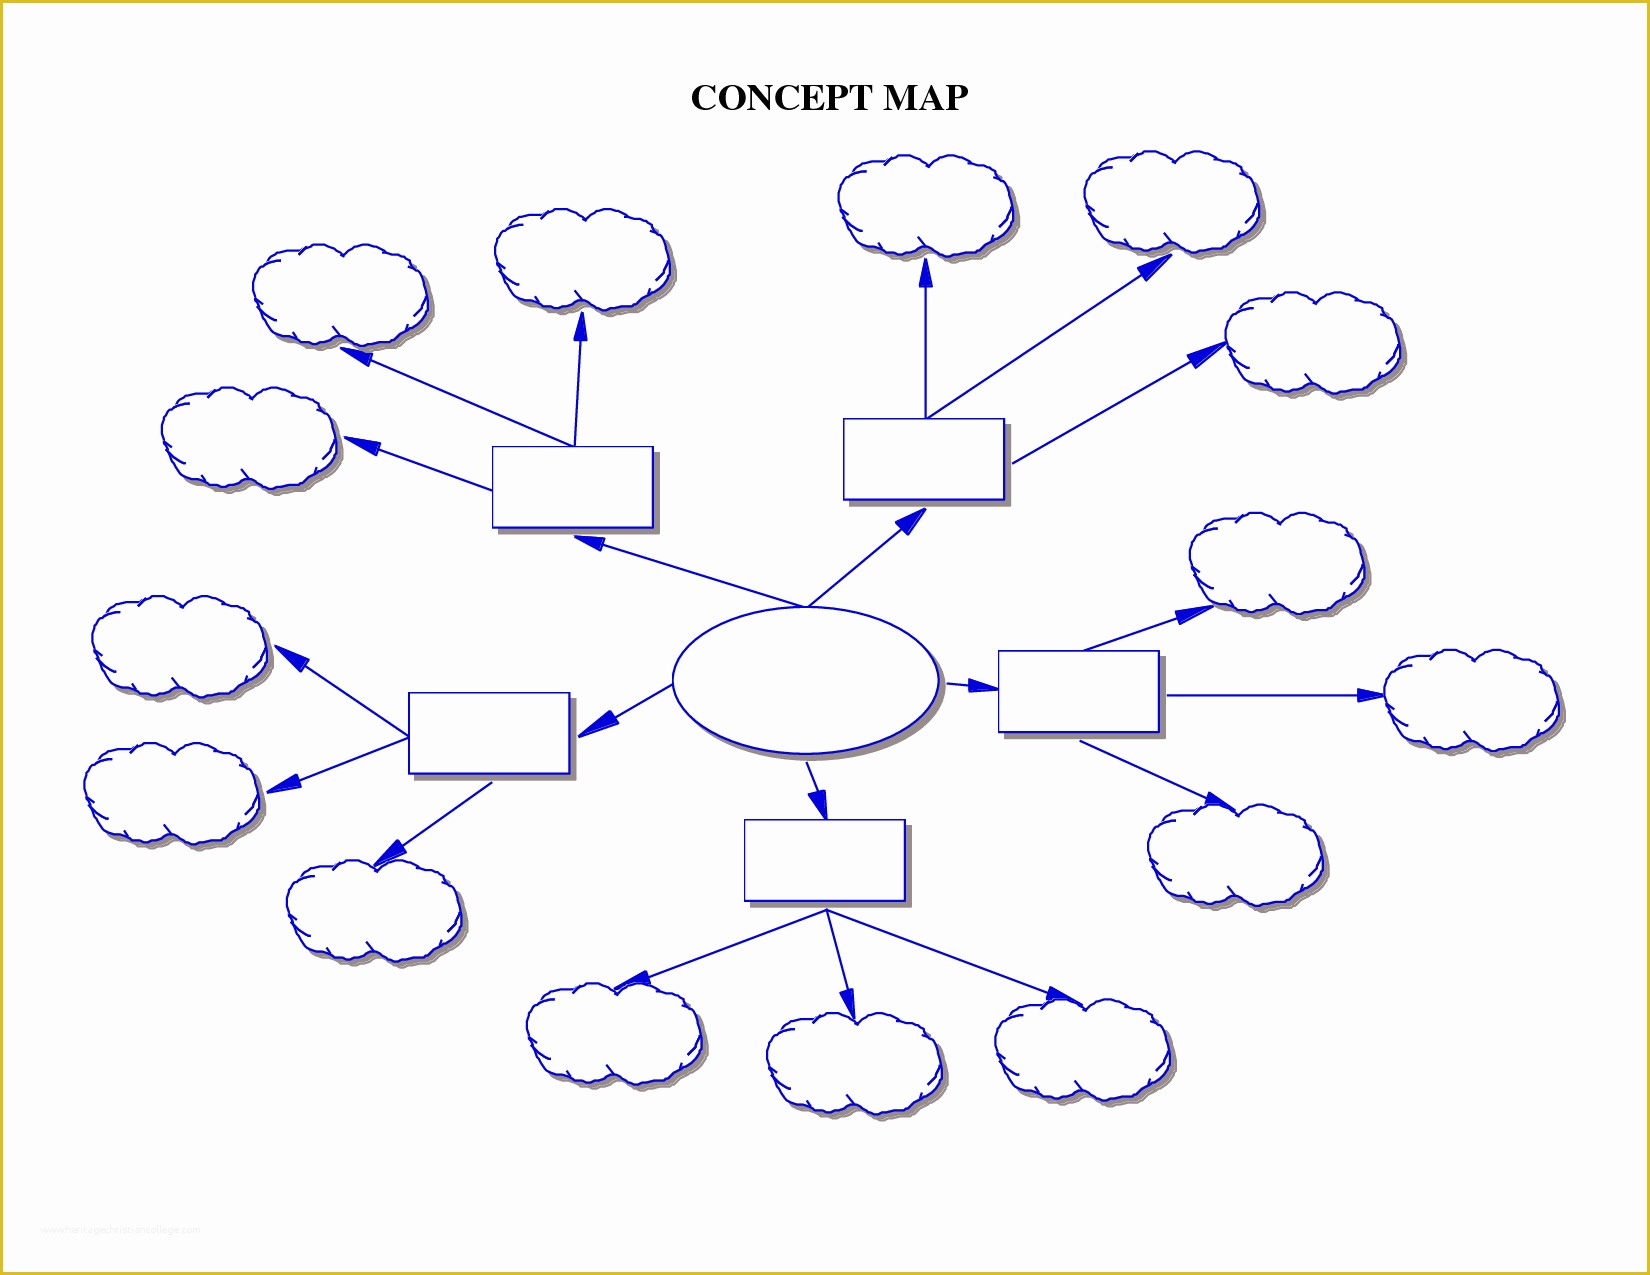 Free Mind Map Template Of A Concept Map Can Be Of Great Help to Teachers In Planning